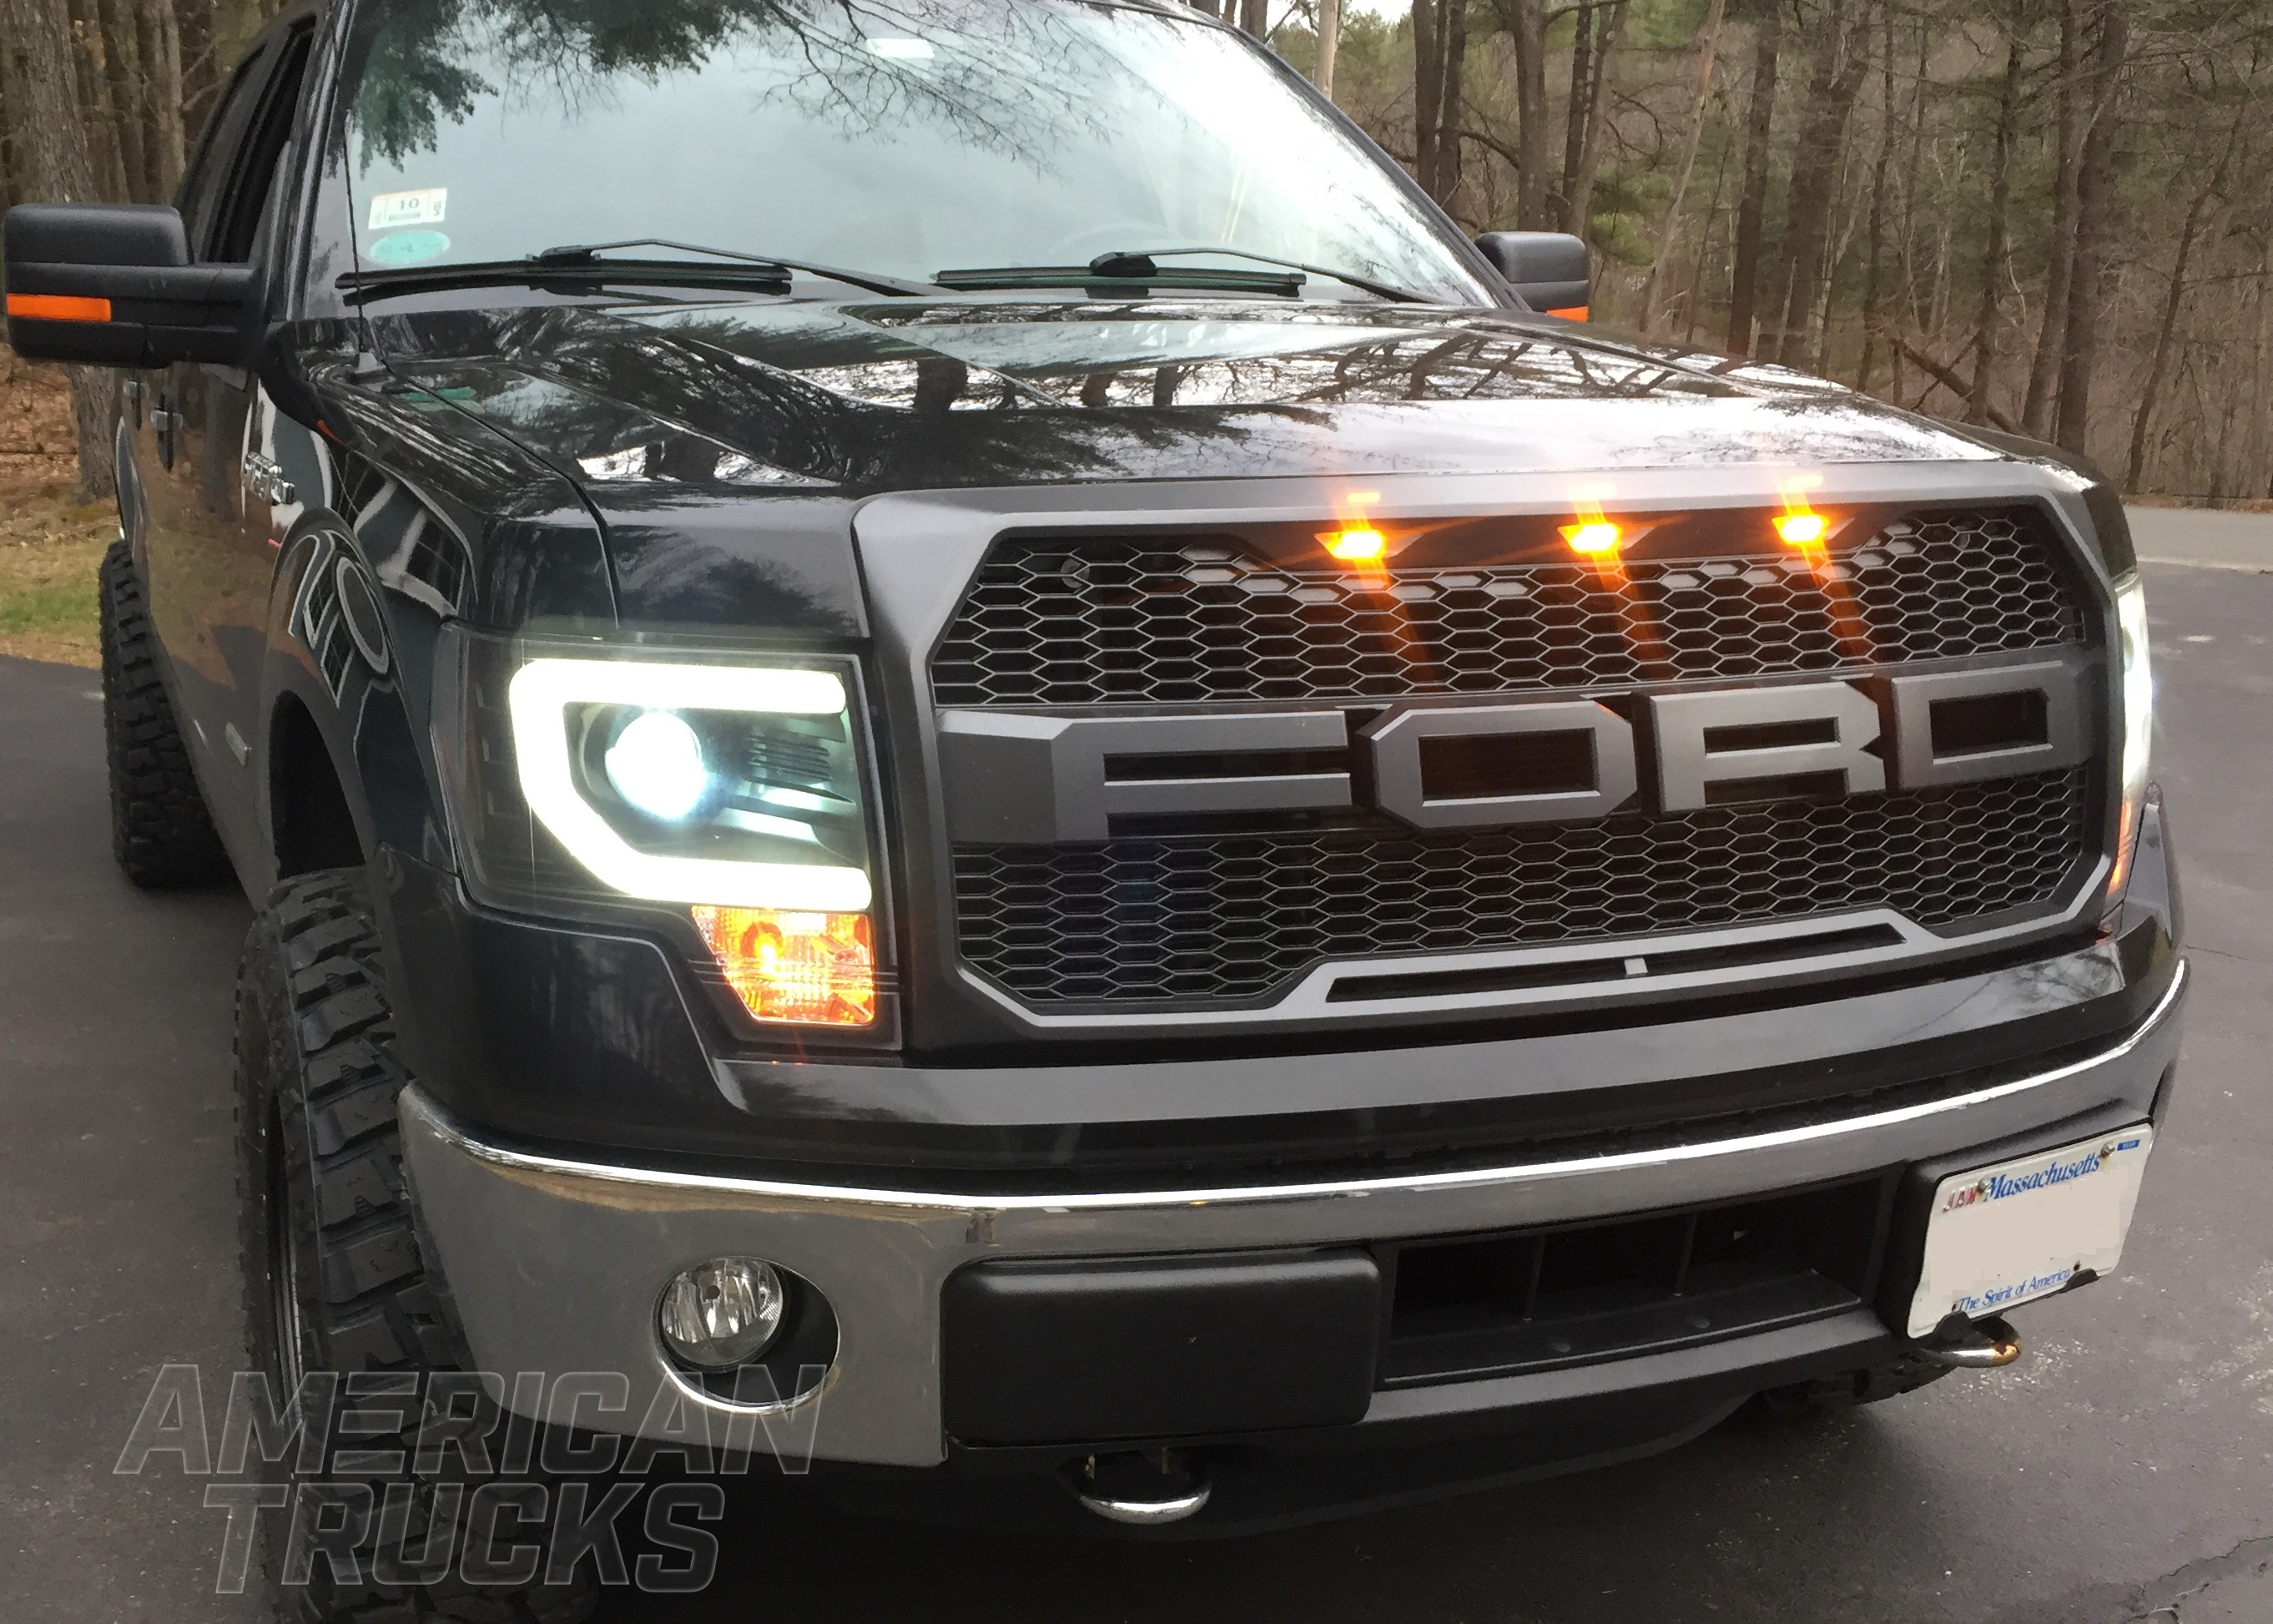 2014 3.5L EcoBoost F150 with Axial Headlights